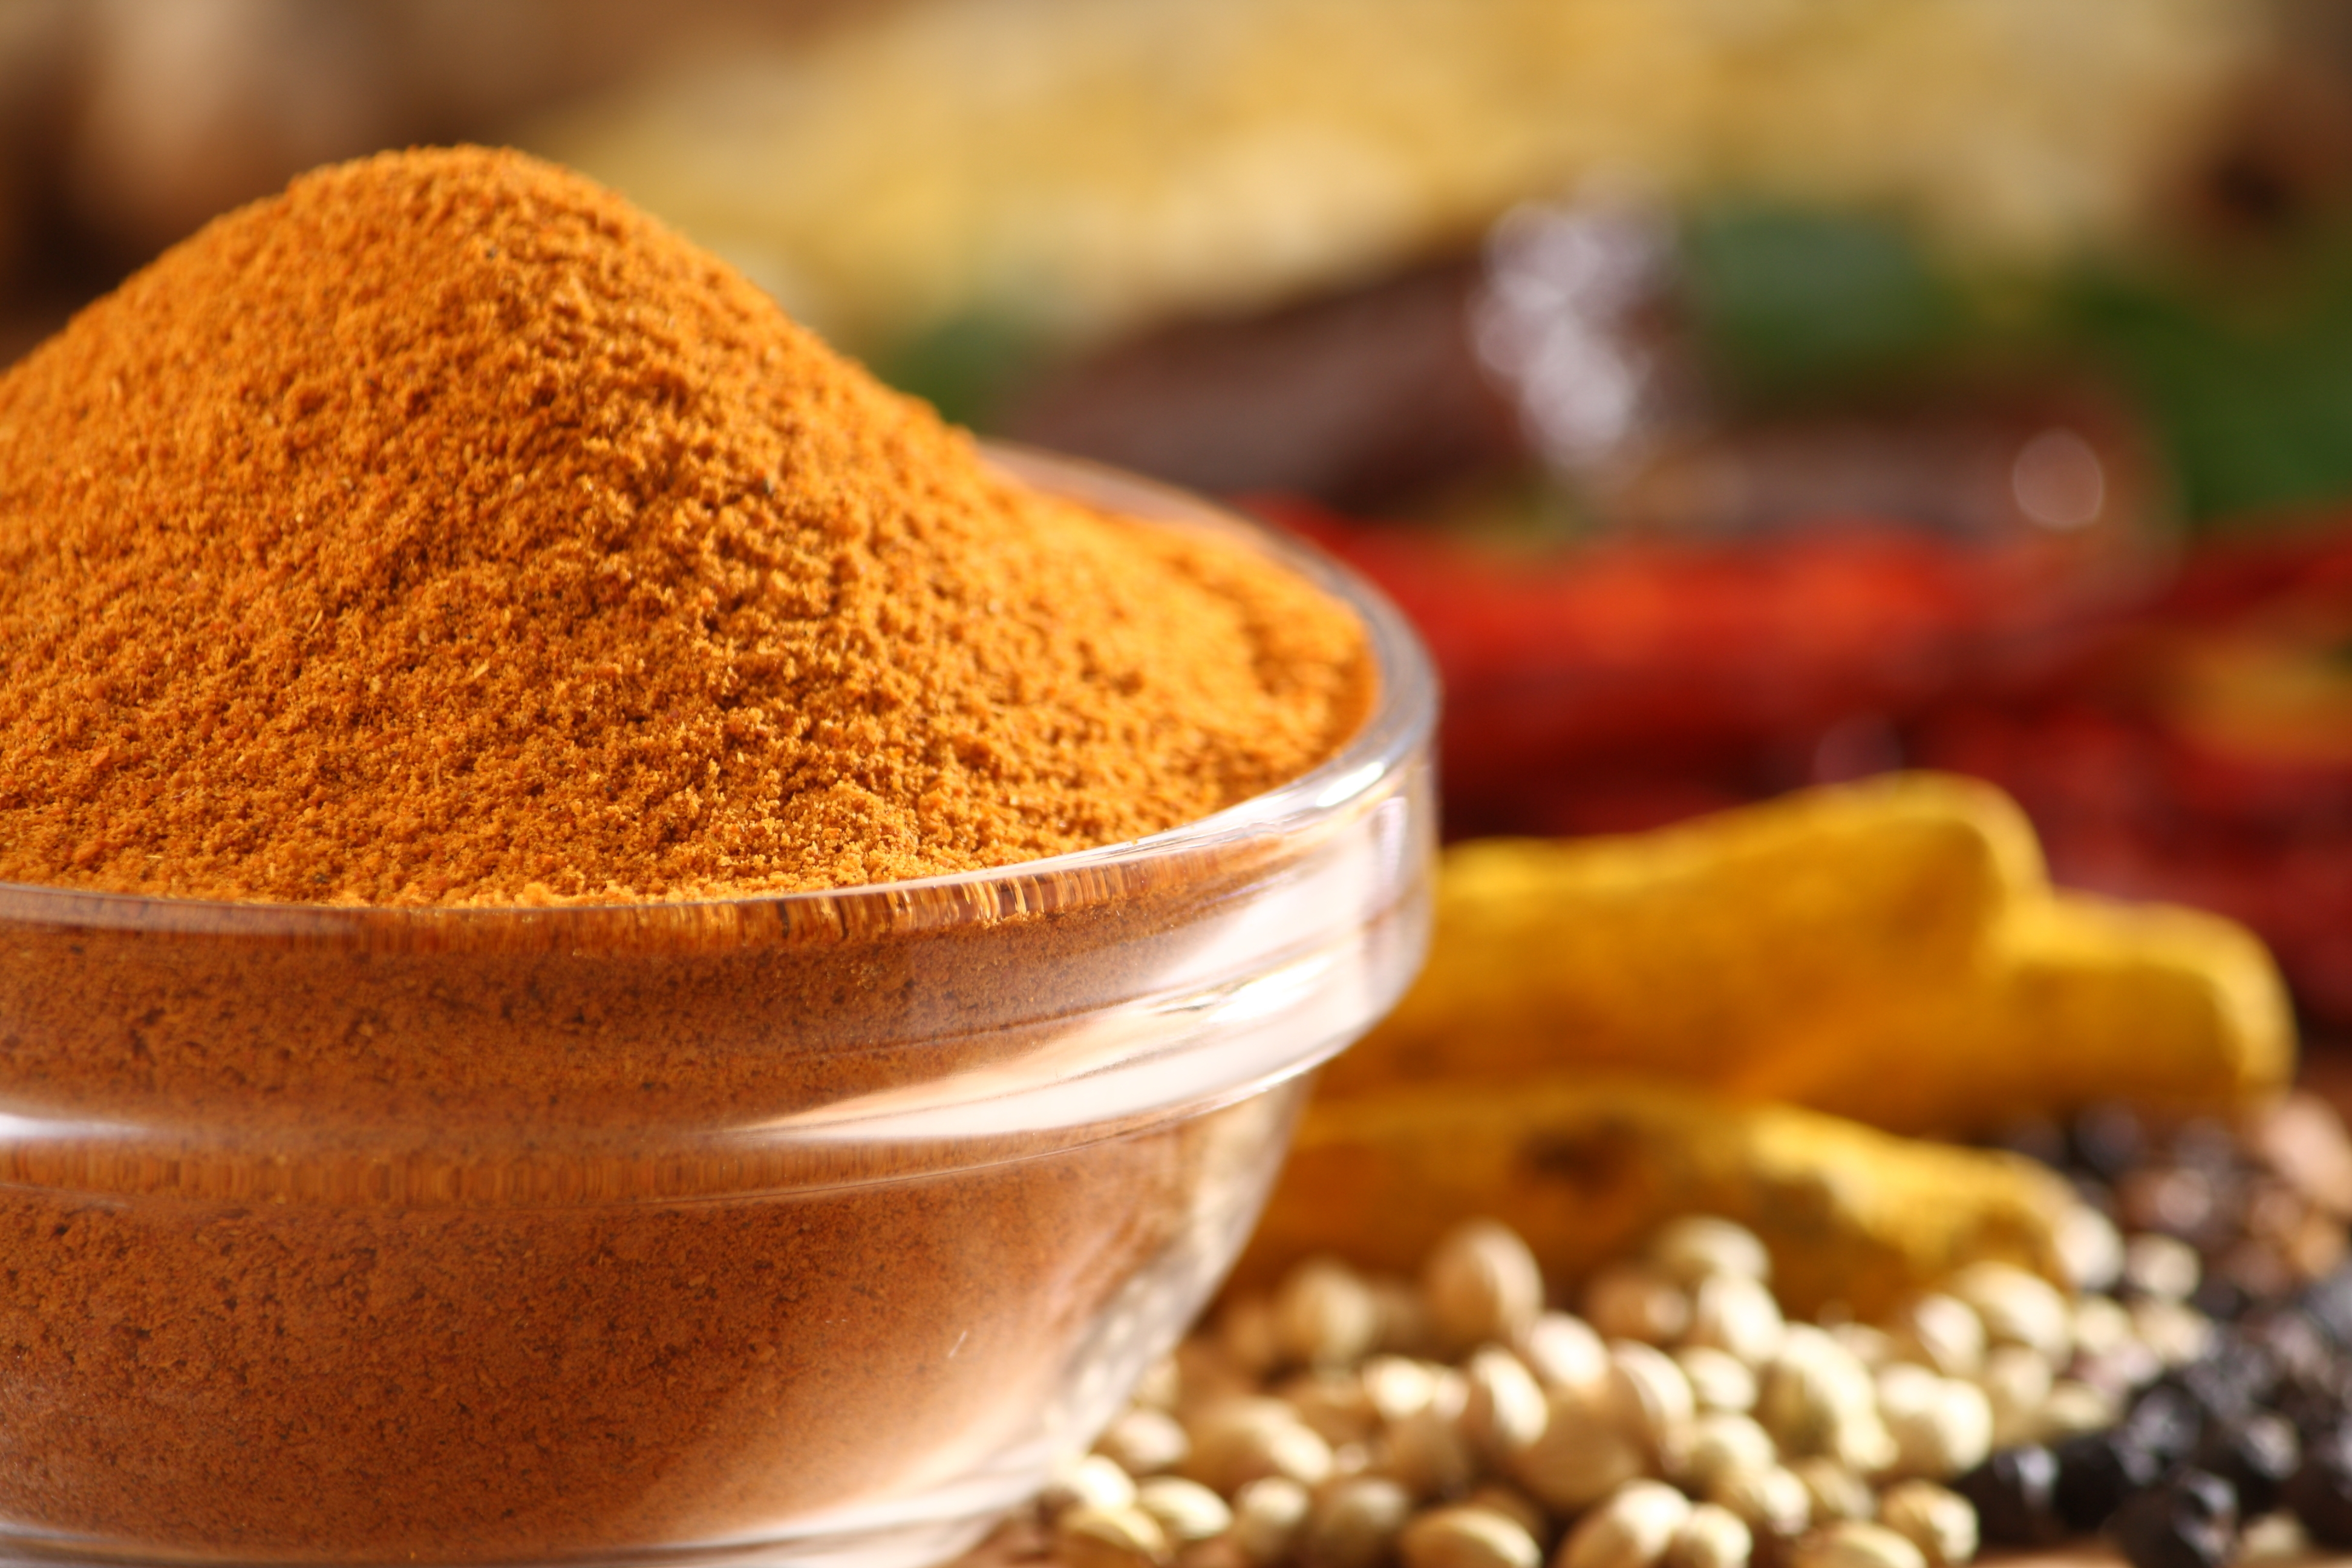 TURMERIC: the spice that keeps you young